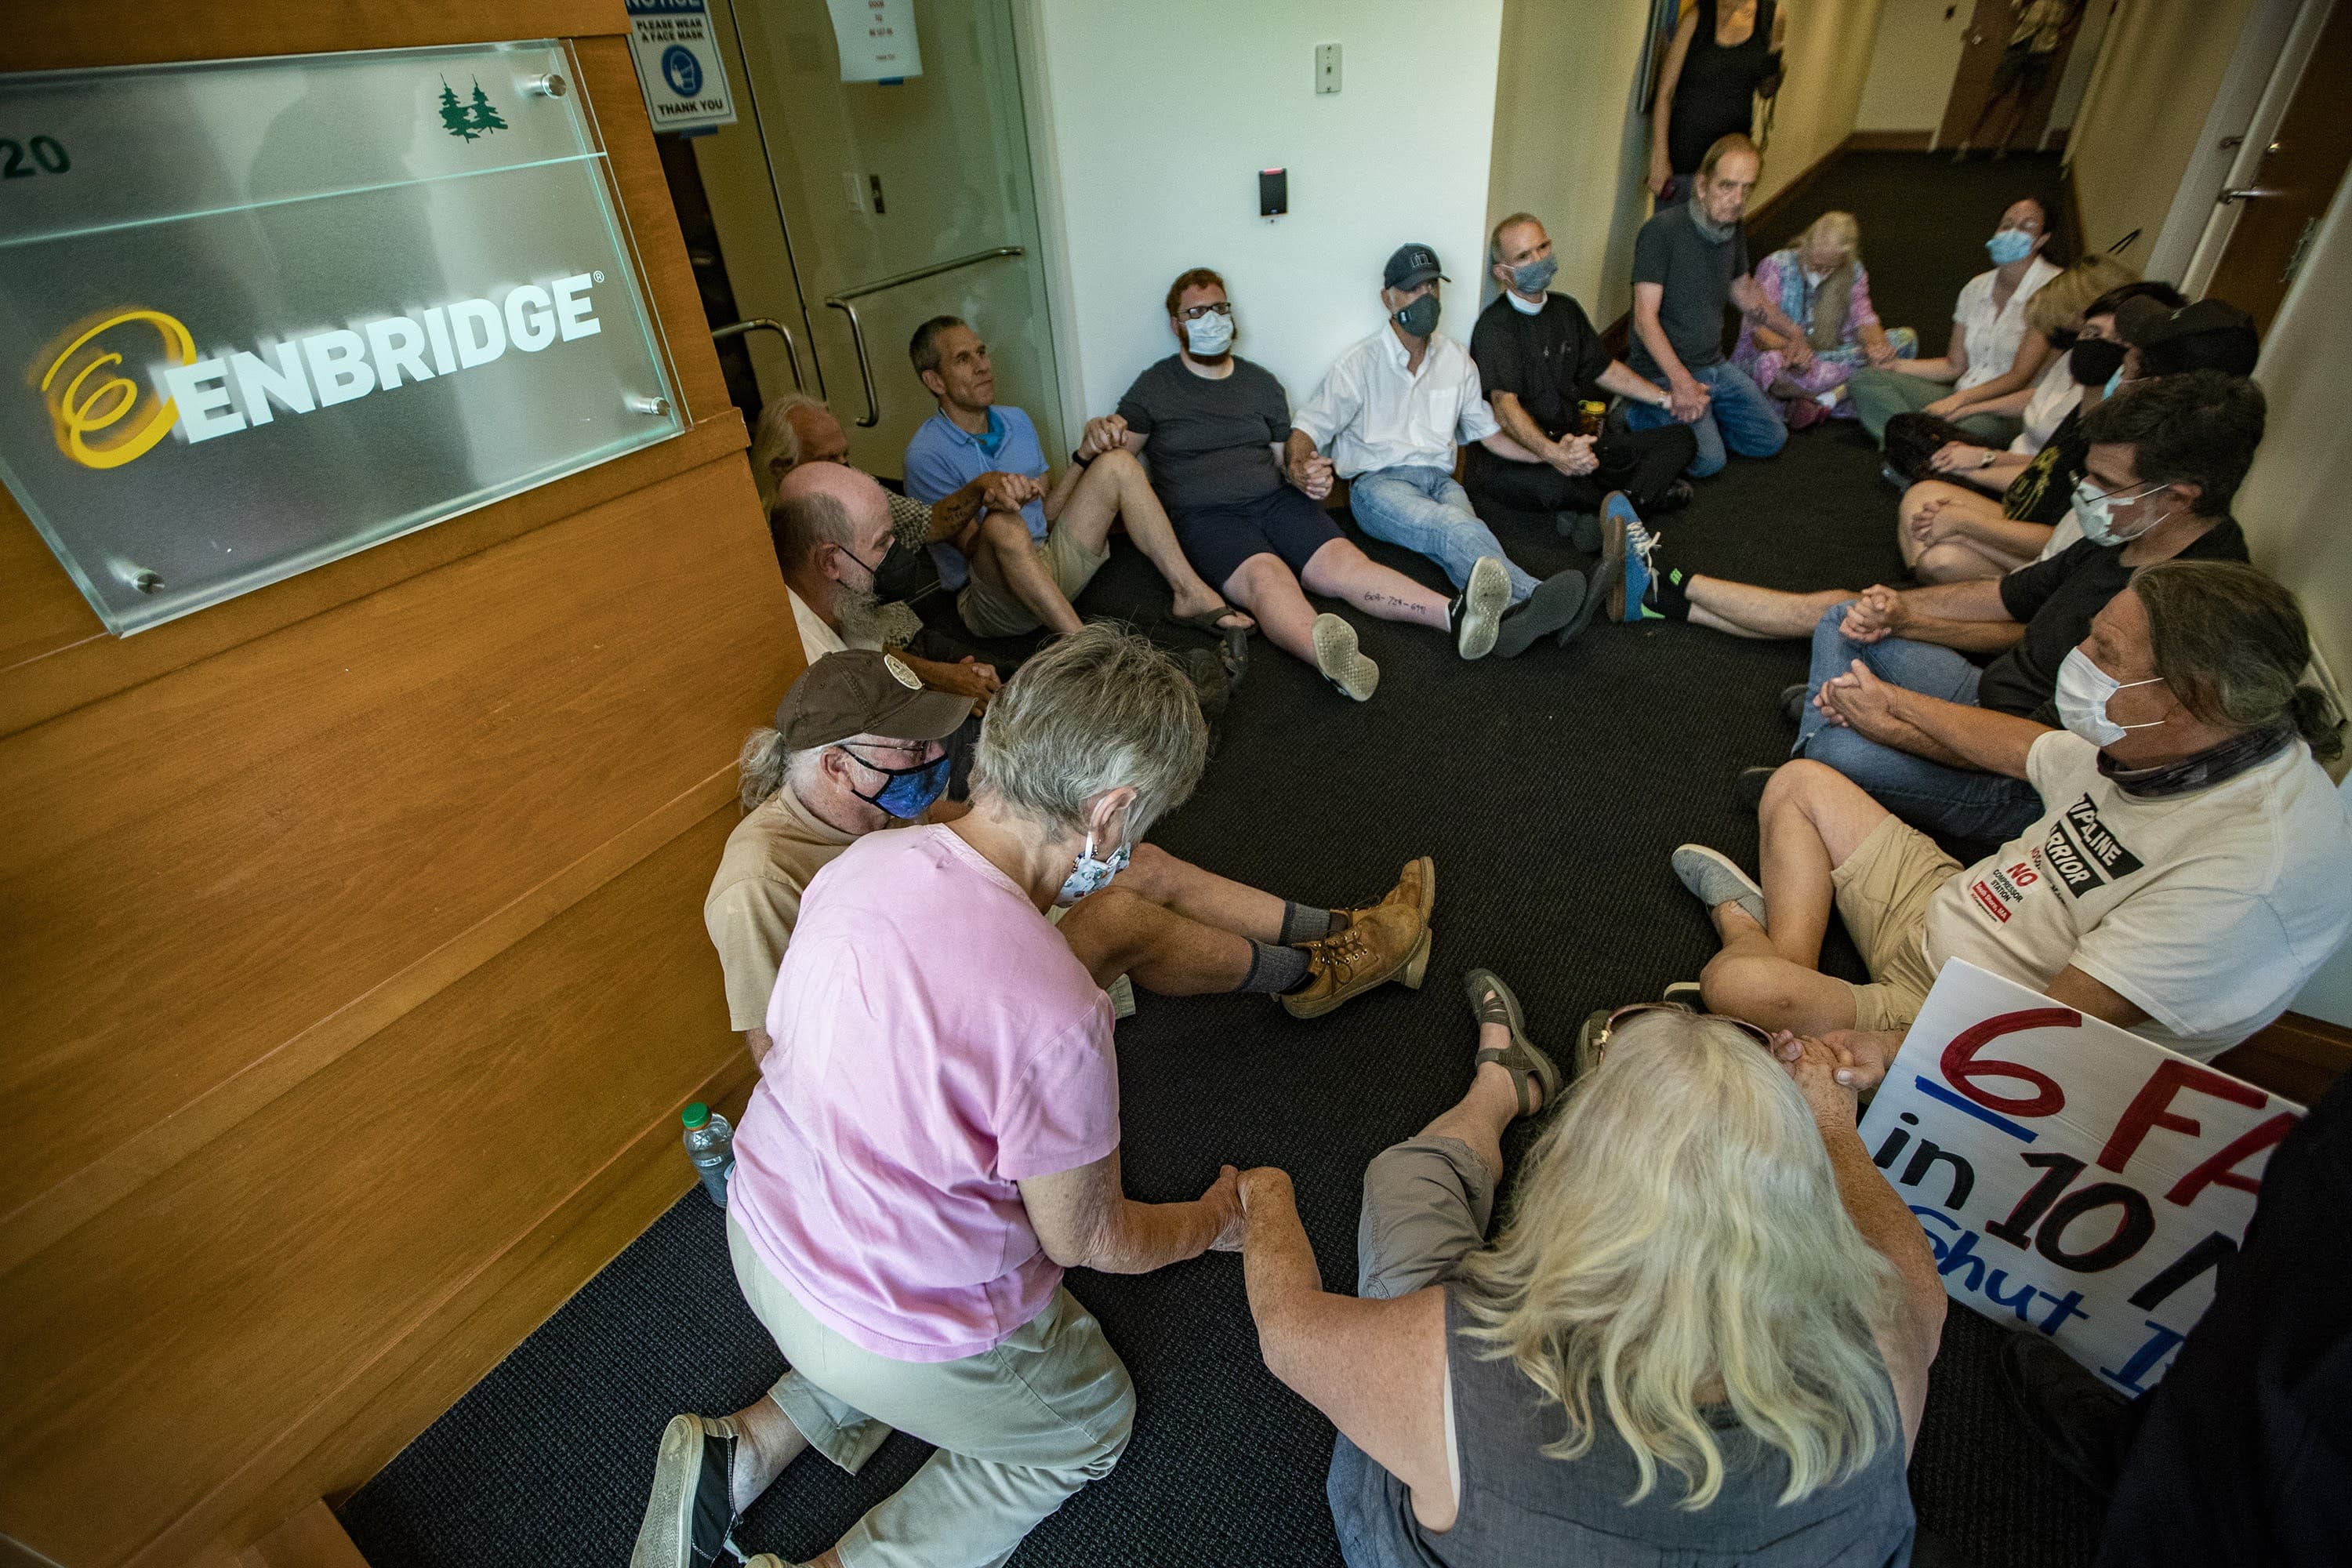 A group of protesters gather near the front door of the Enbridge office in Waltham. (Jesse Costa/WBUR)